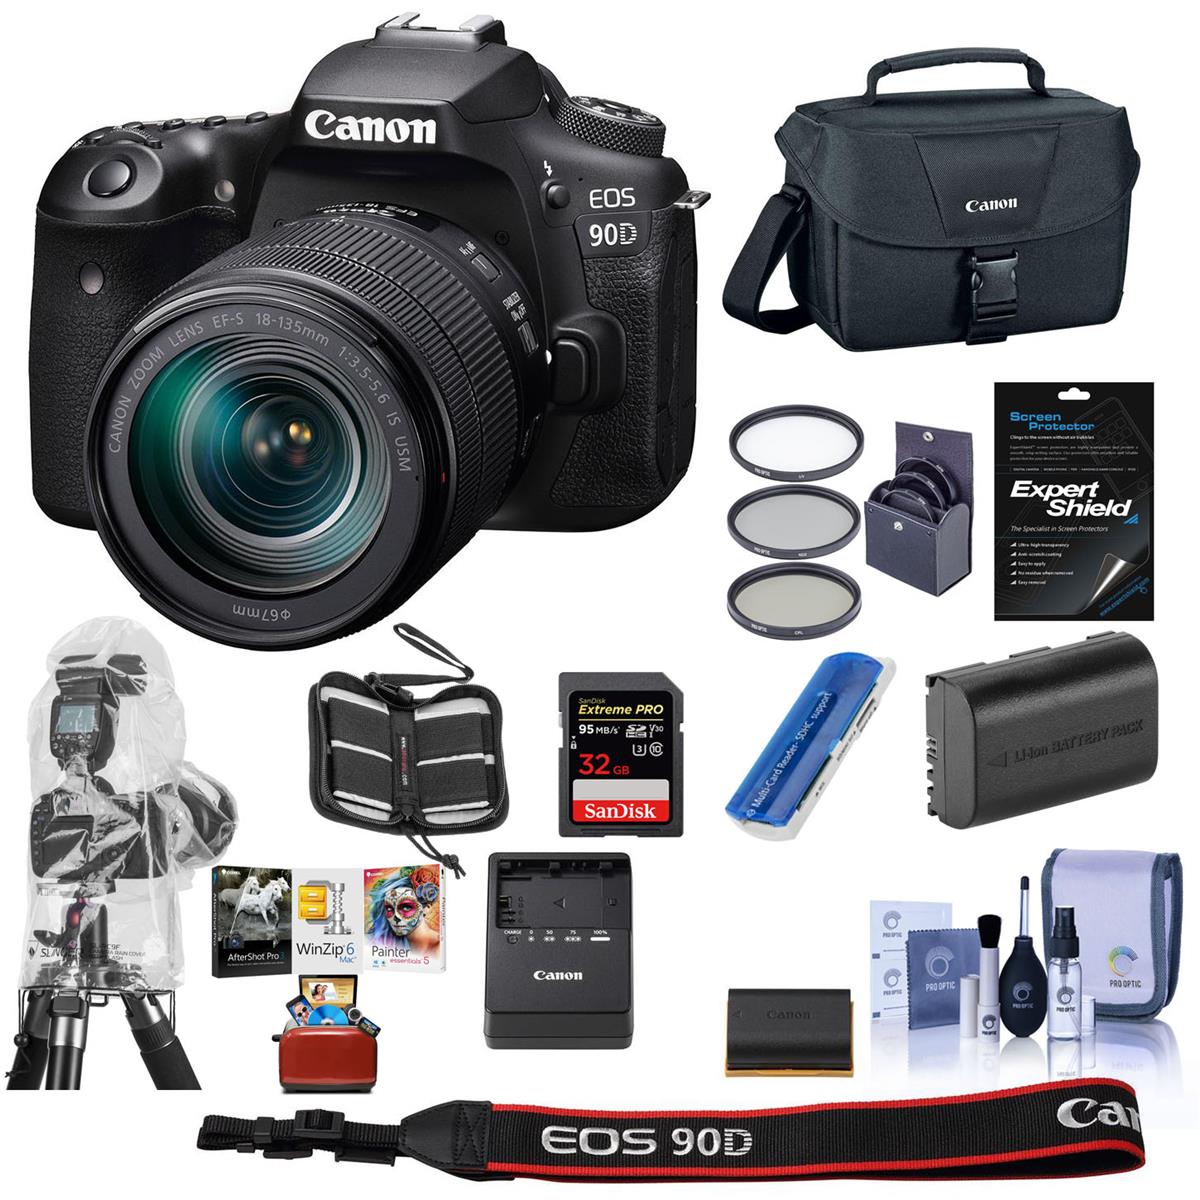 Image of Canon EOS 90D DSLR Camera with EFS 18-135mm f/3.5-5.6 IS USM Lens W/Free Mac Kit